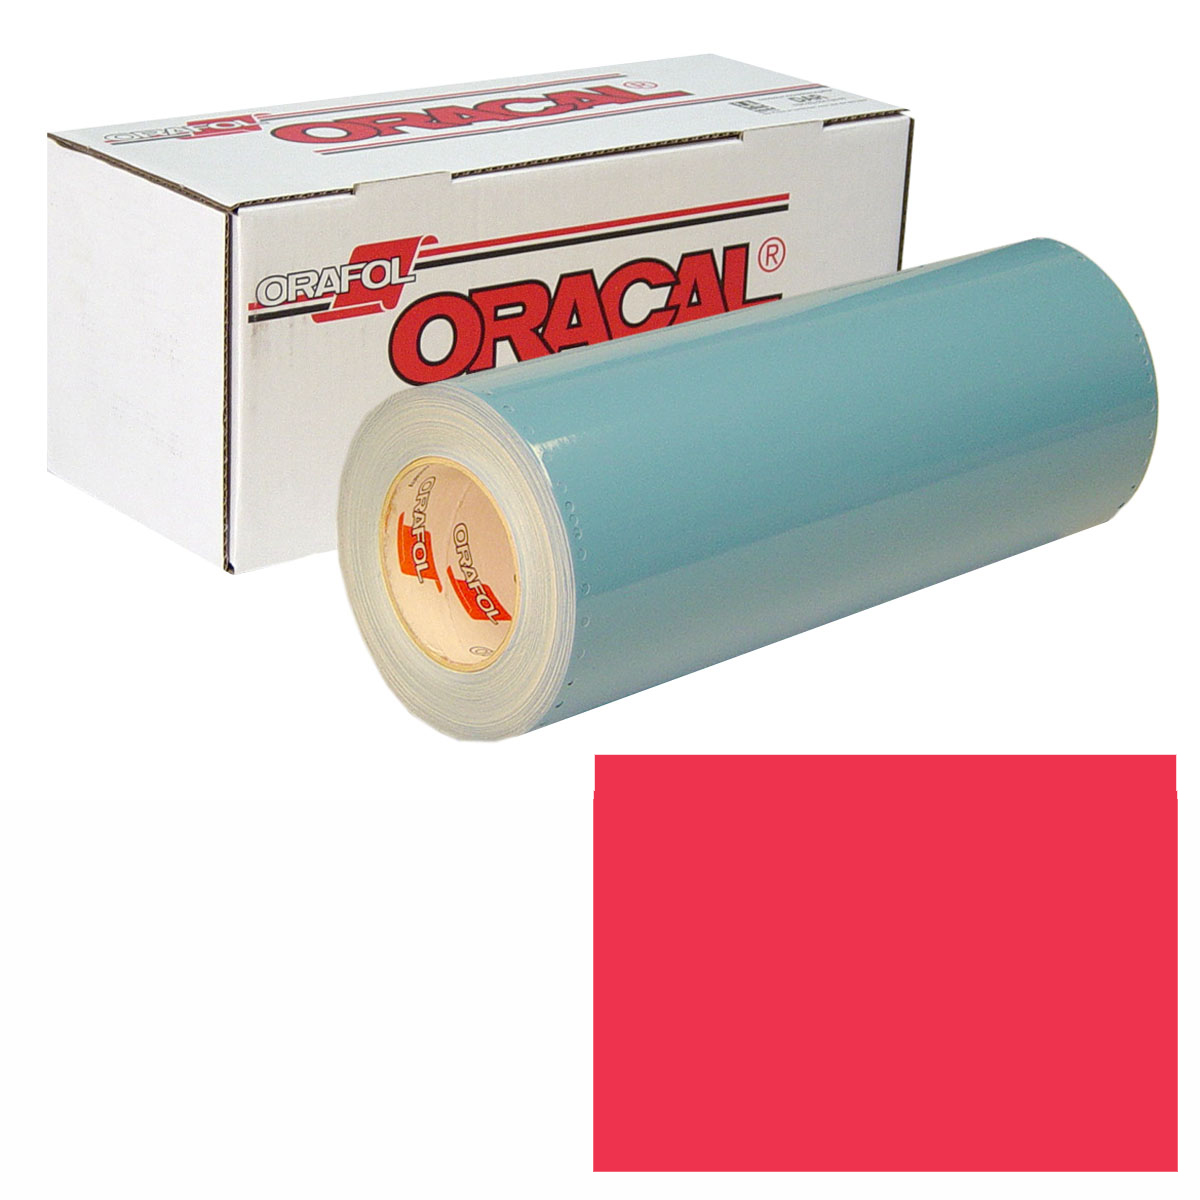 ORACAL 951 30in X 50yd 324 Blood Red